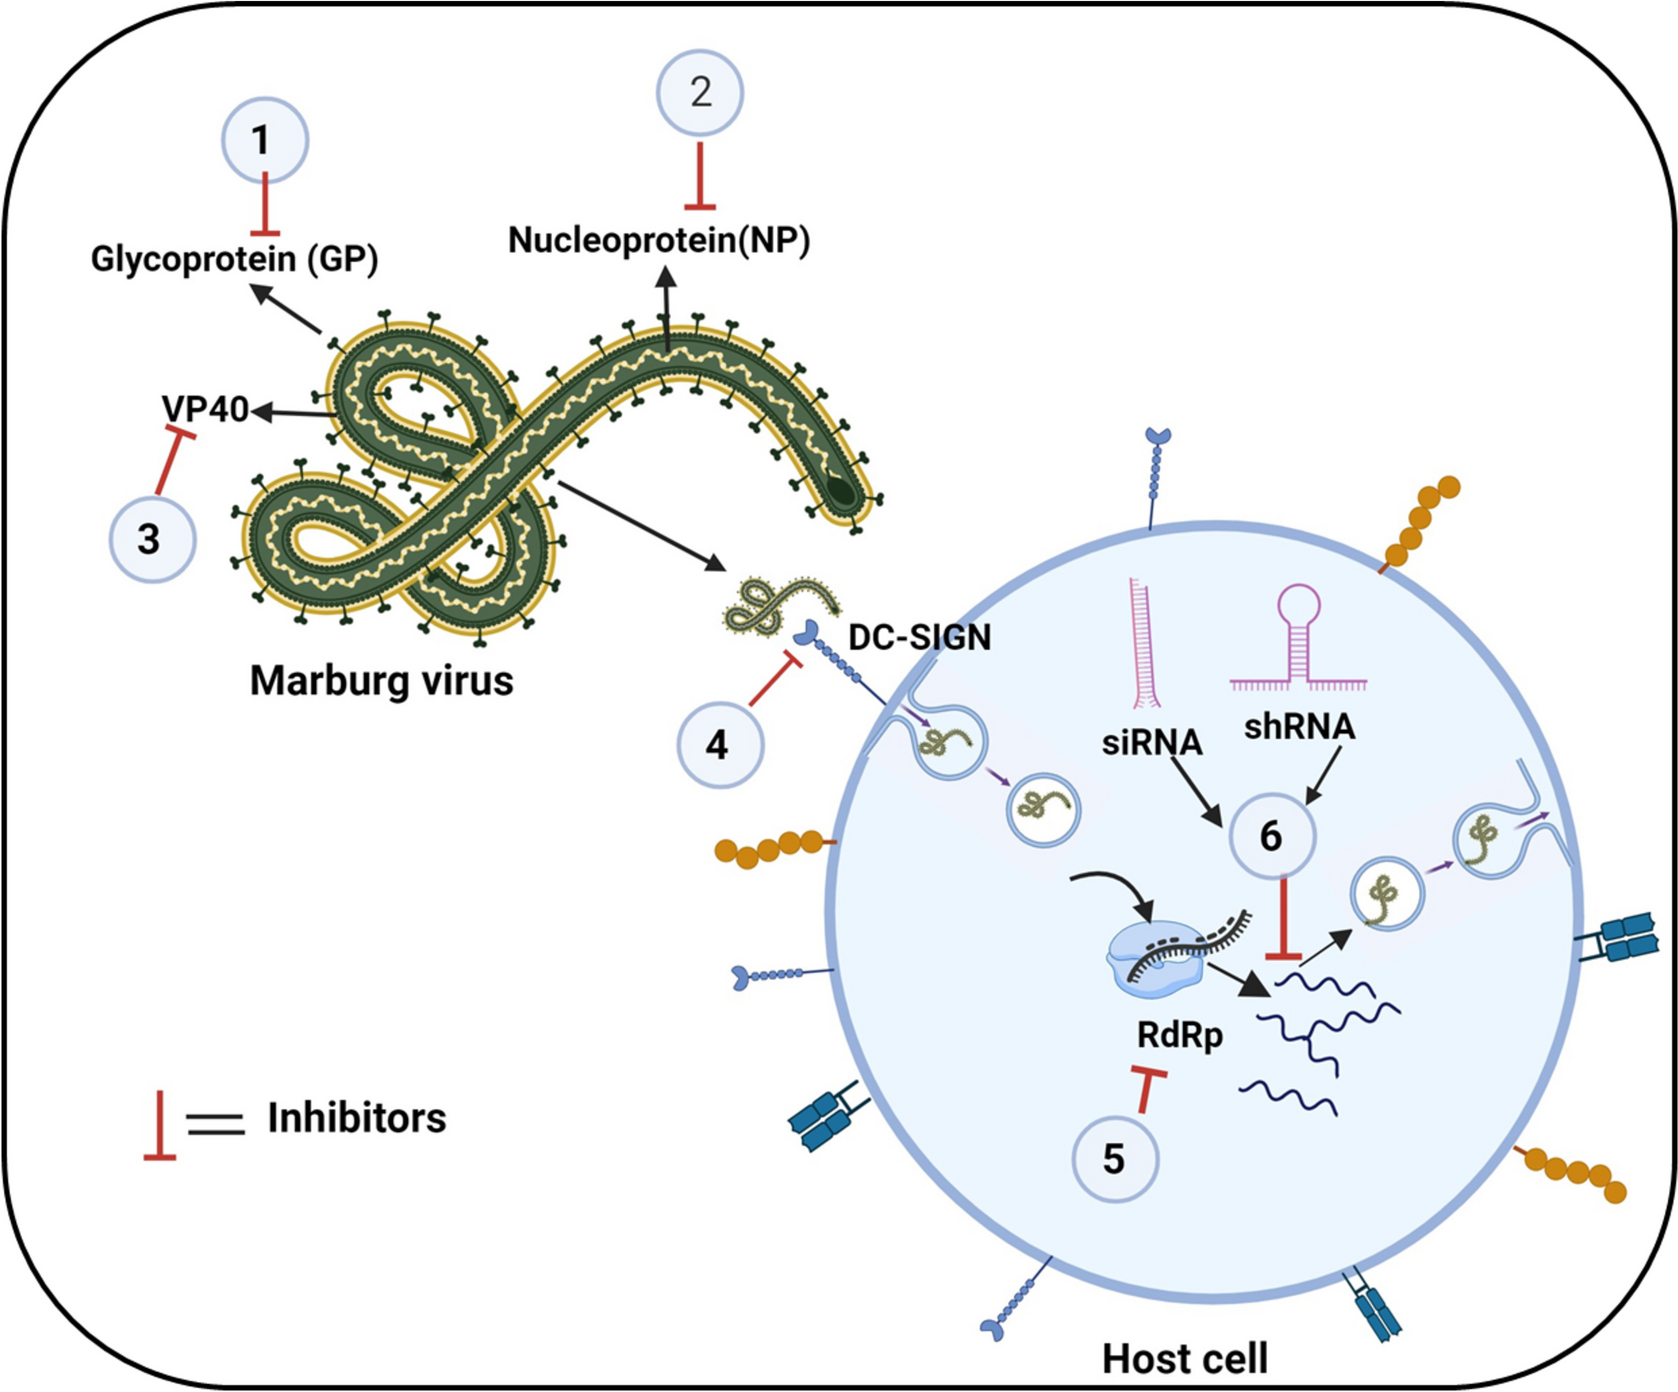 Recent Advancements in the Therapeutic Development for Marburg Virus: Updates on Clinical Trials